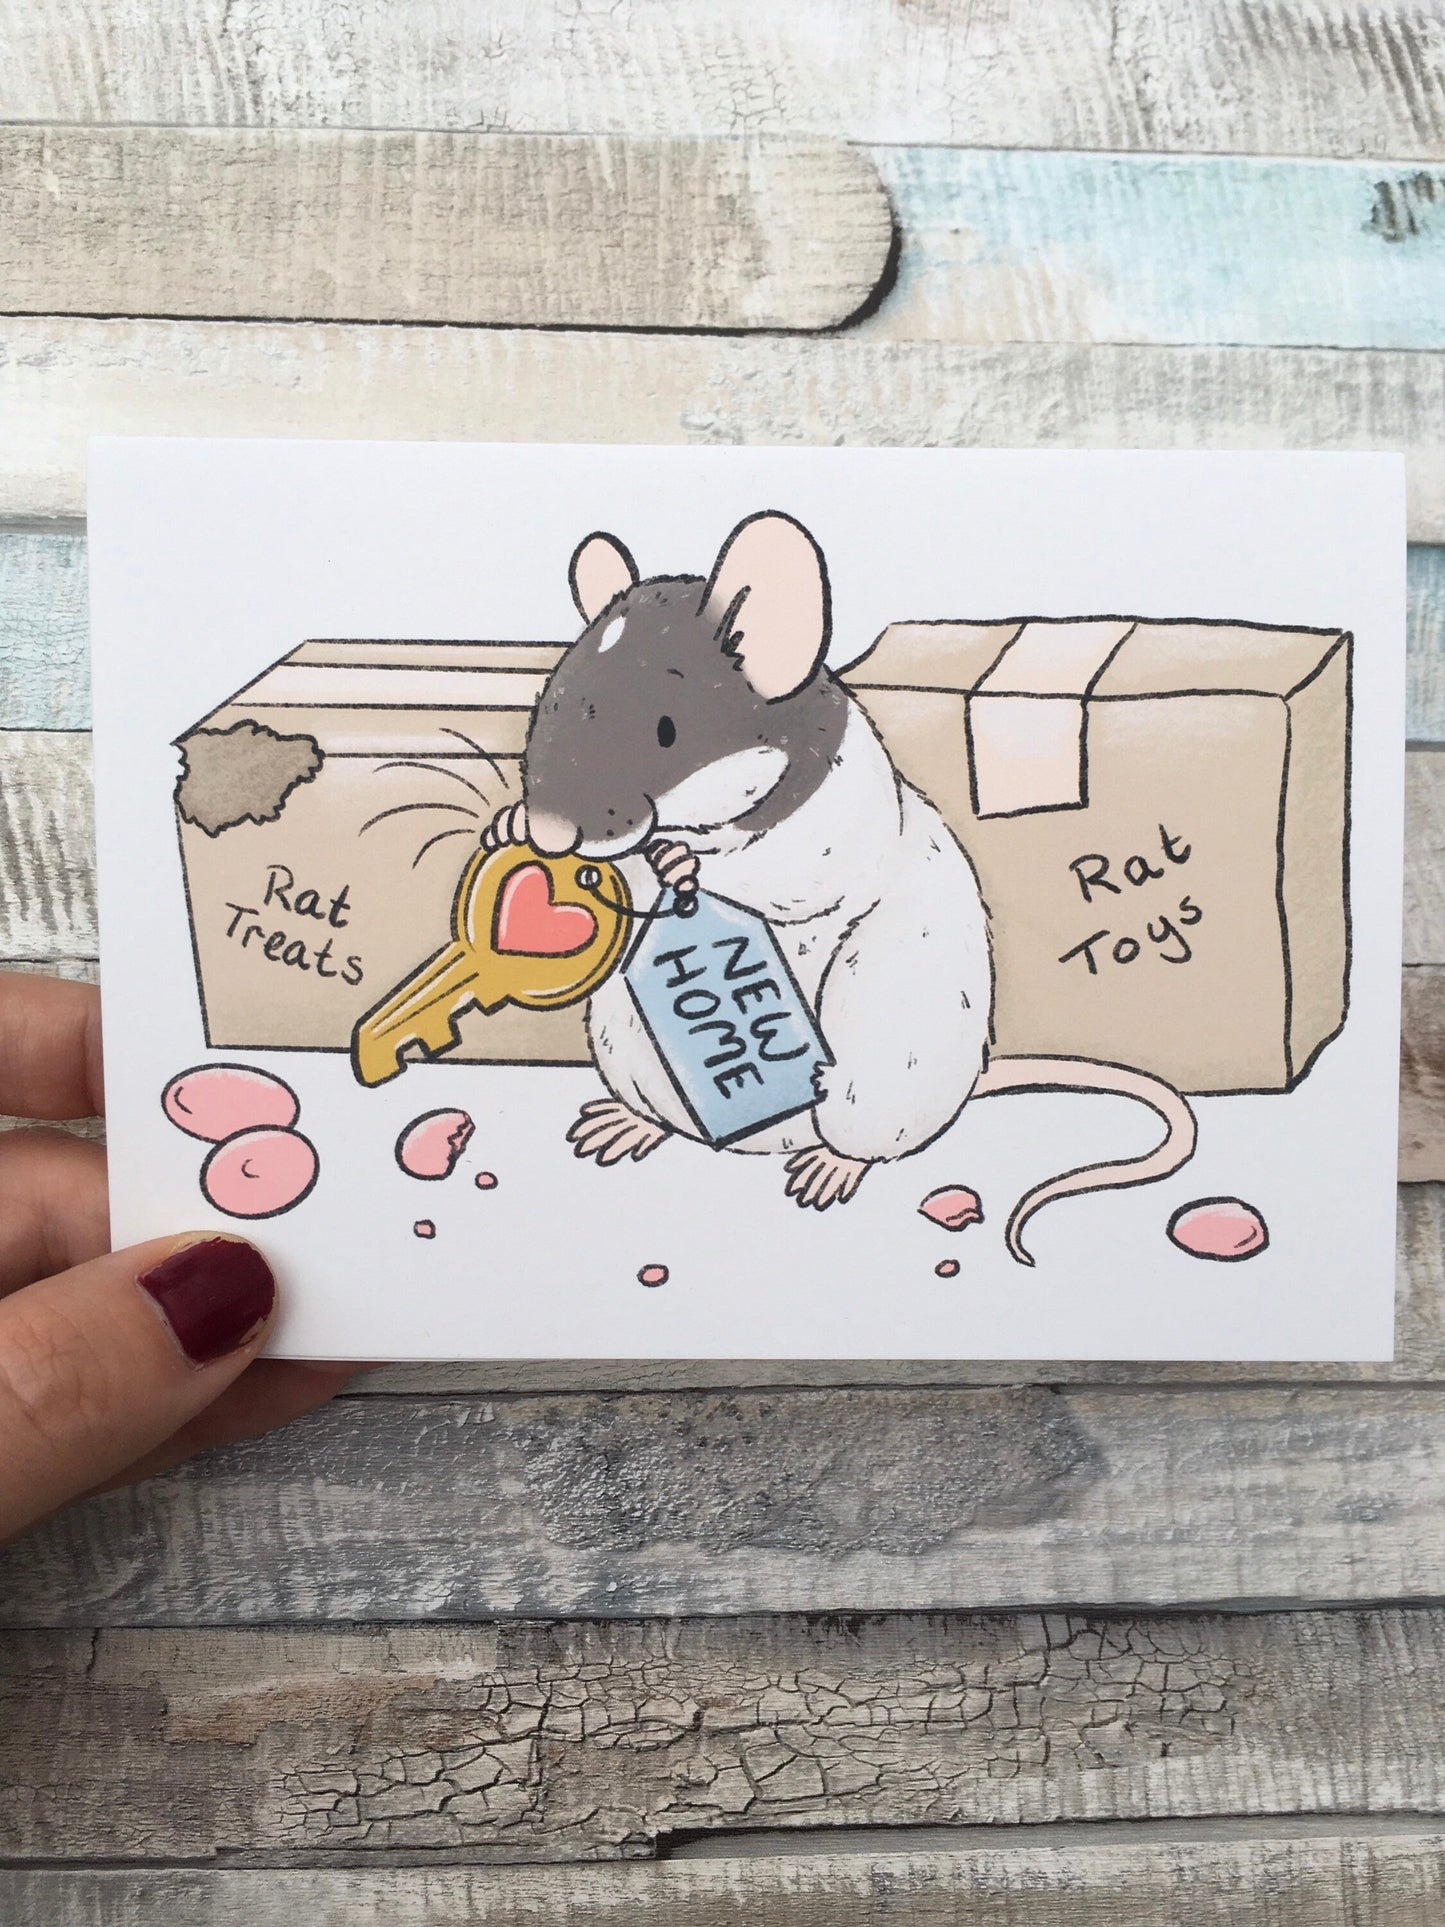 New Home Cute Rat Greeting Card - A6 Size With White Envelope - Fancy Rat Art - Moving, New Home Card